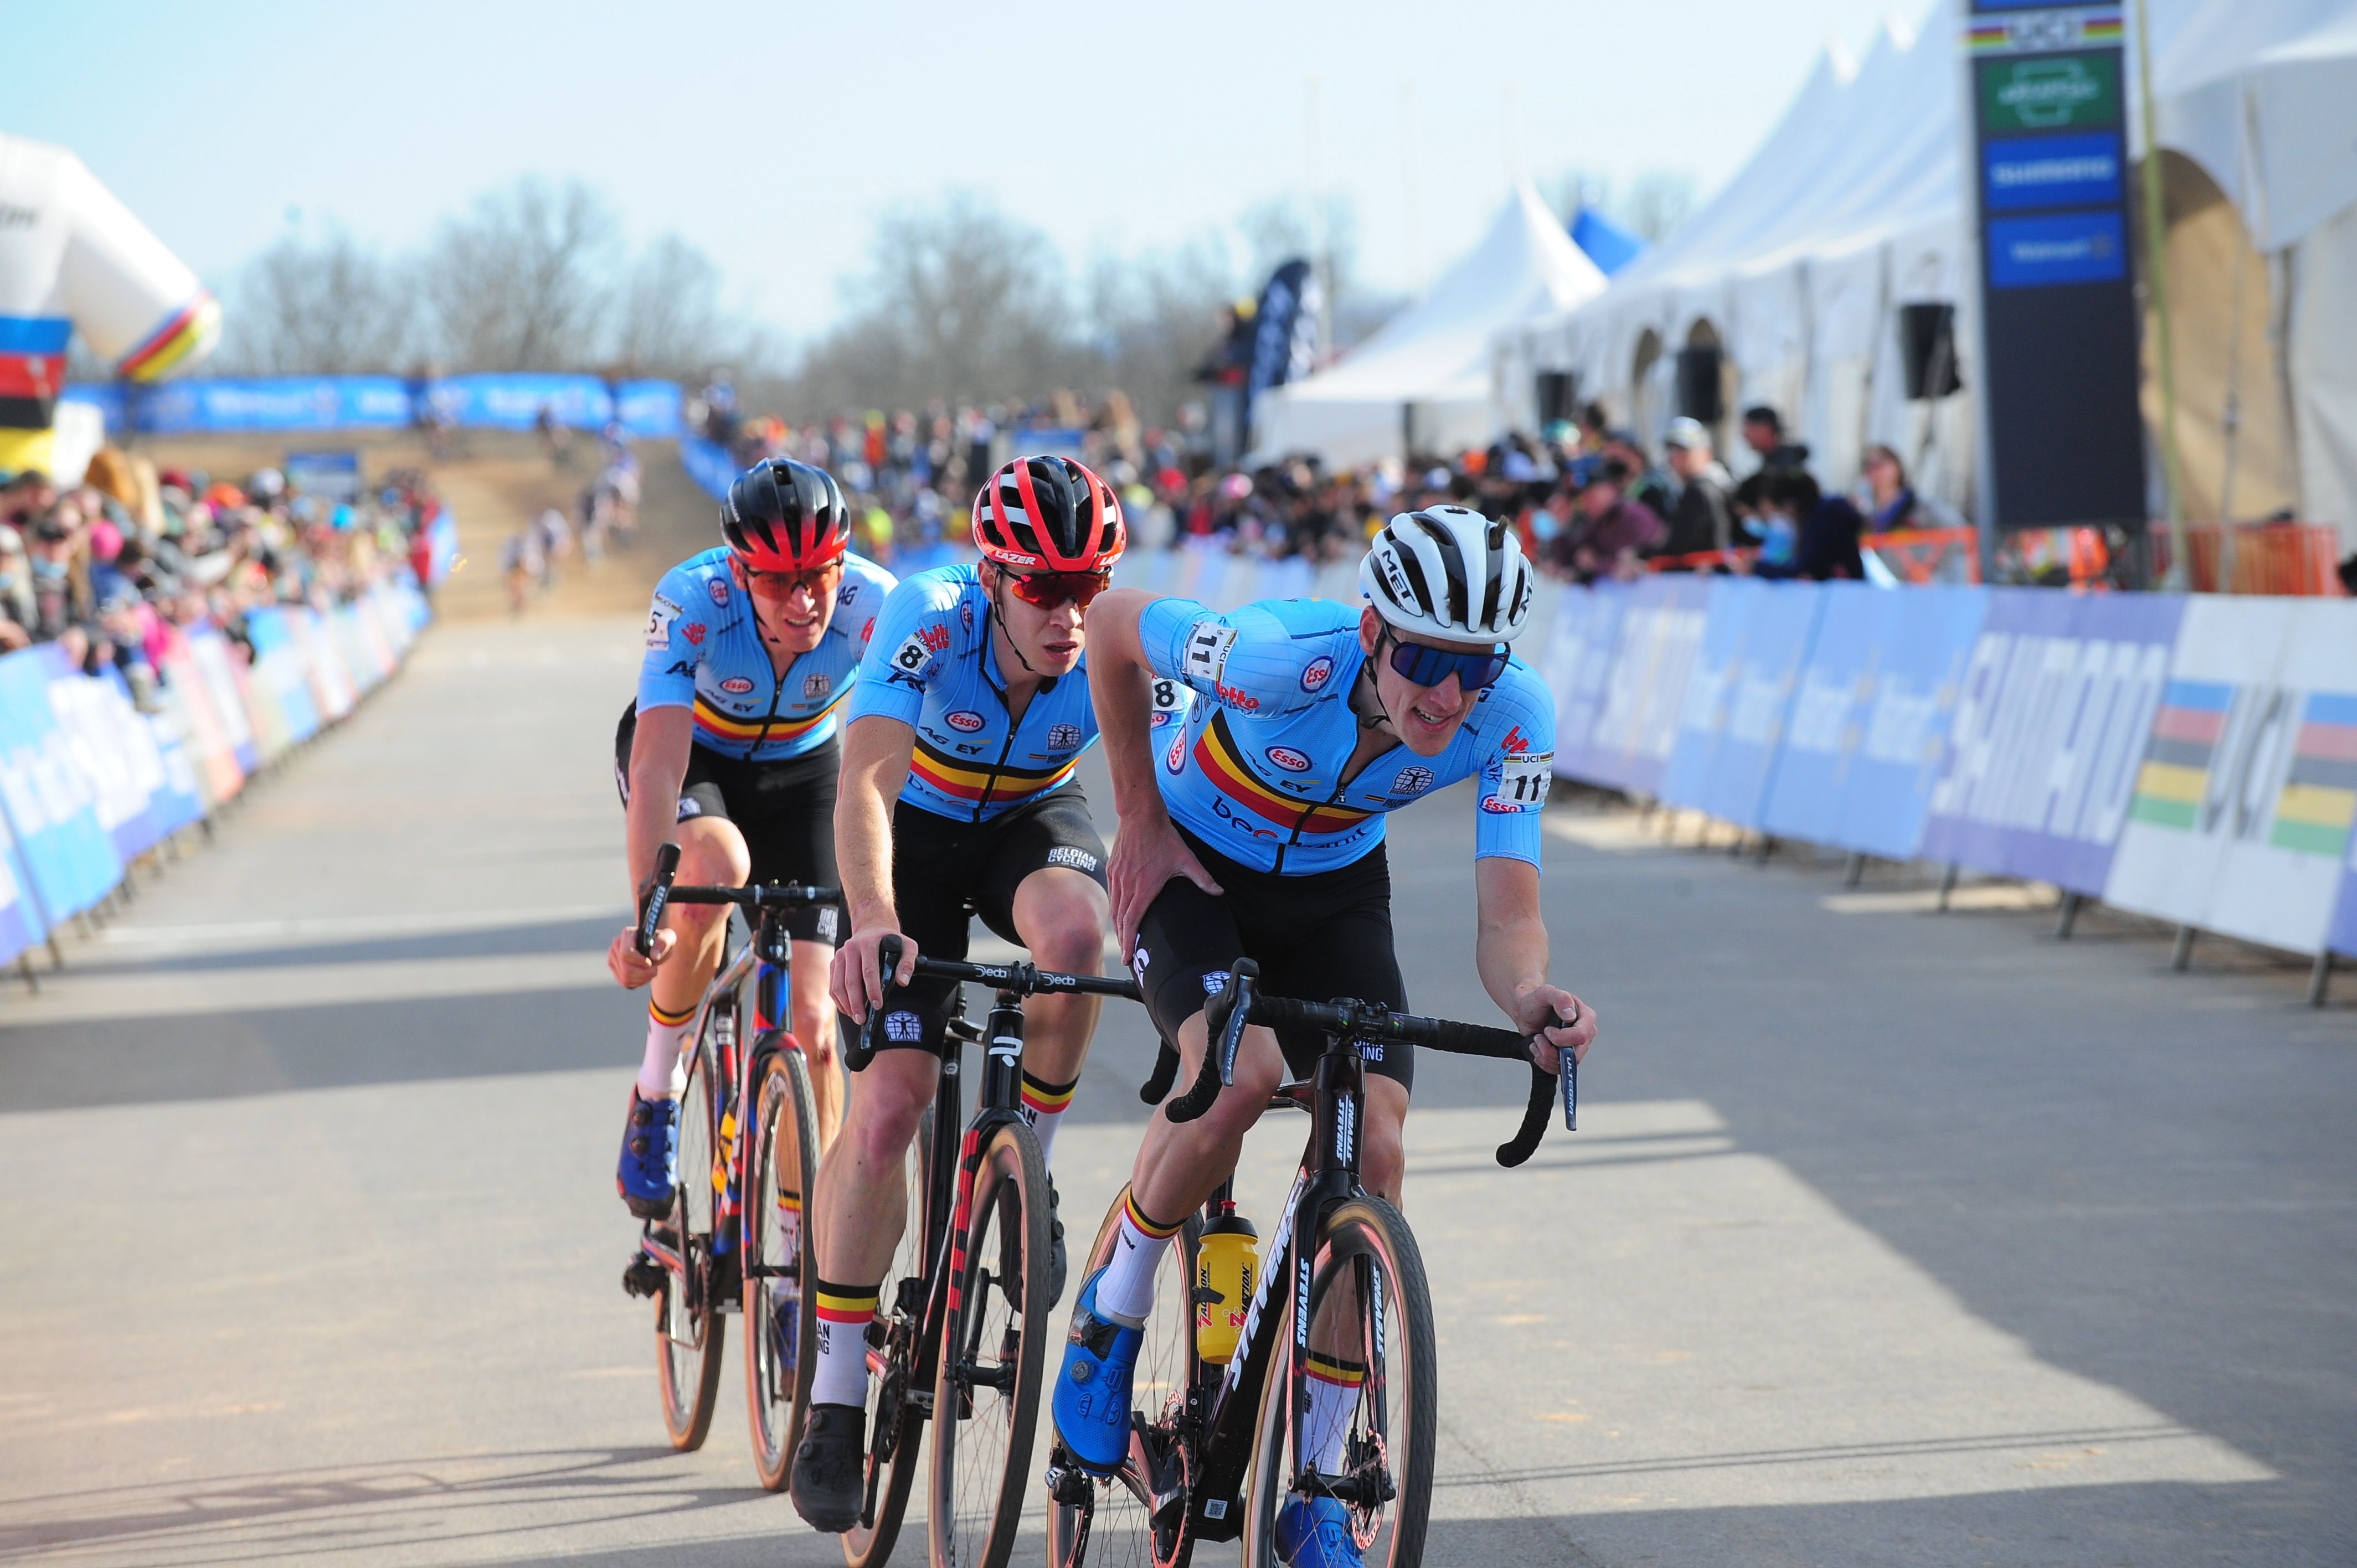 Three cyclists compete in the elite men's category at a cyclo-cross event. 